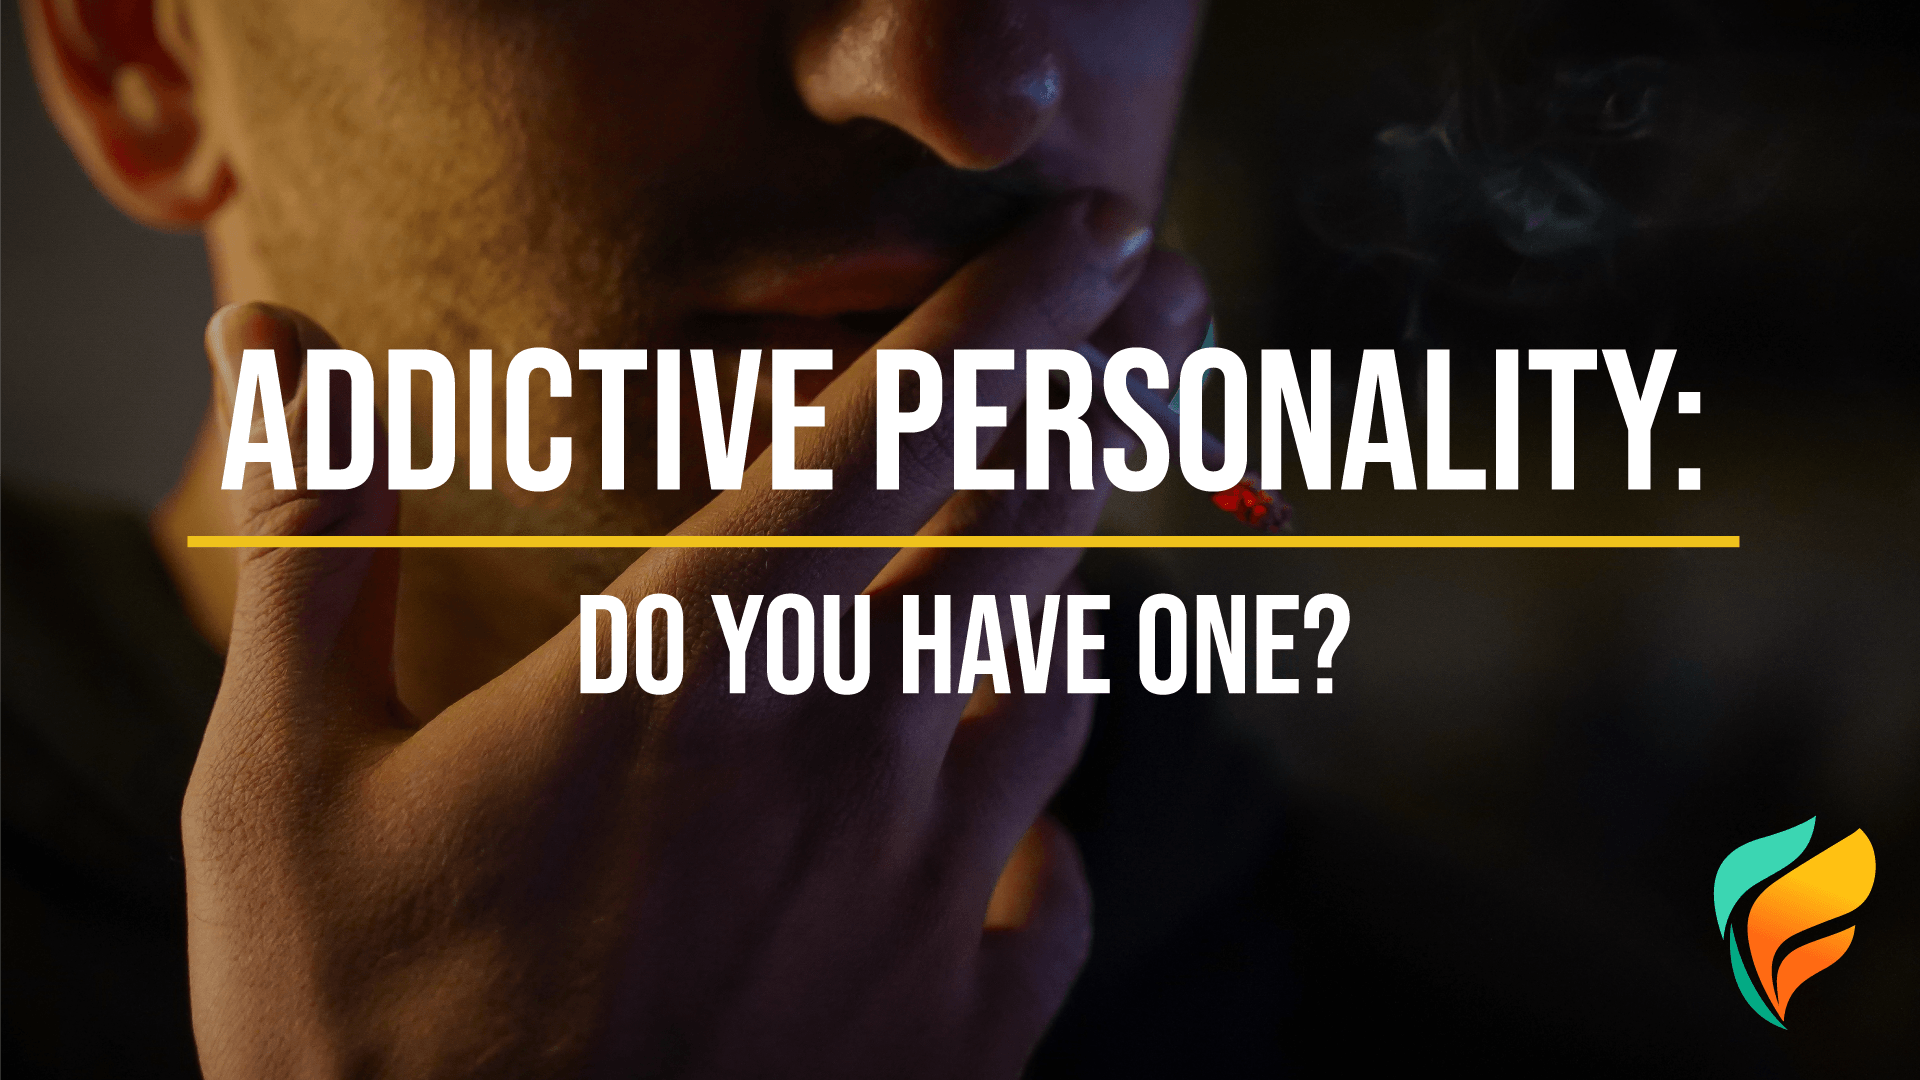 What is an Addictive Personality, and Do You Have One?